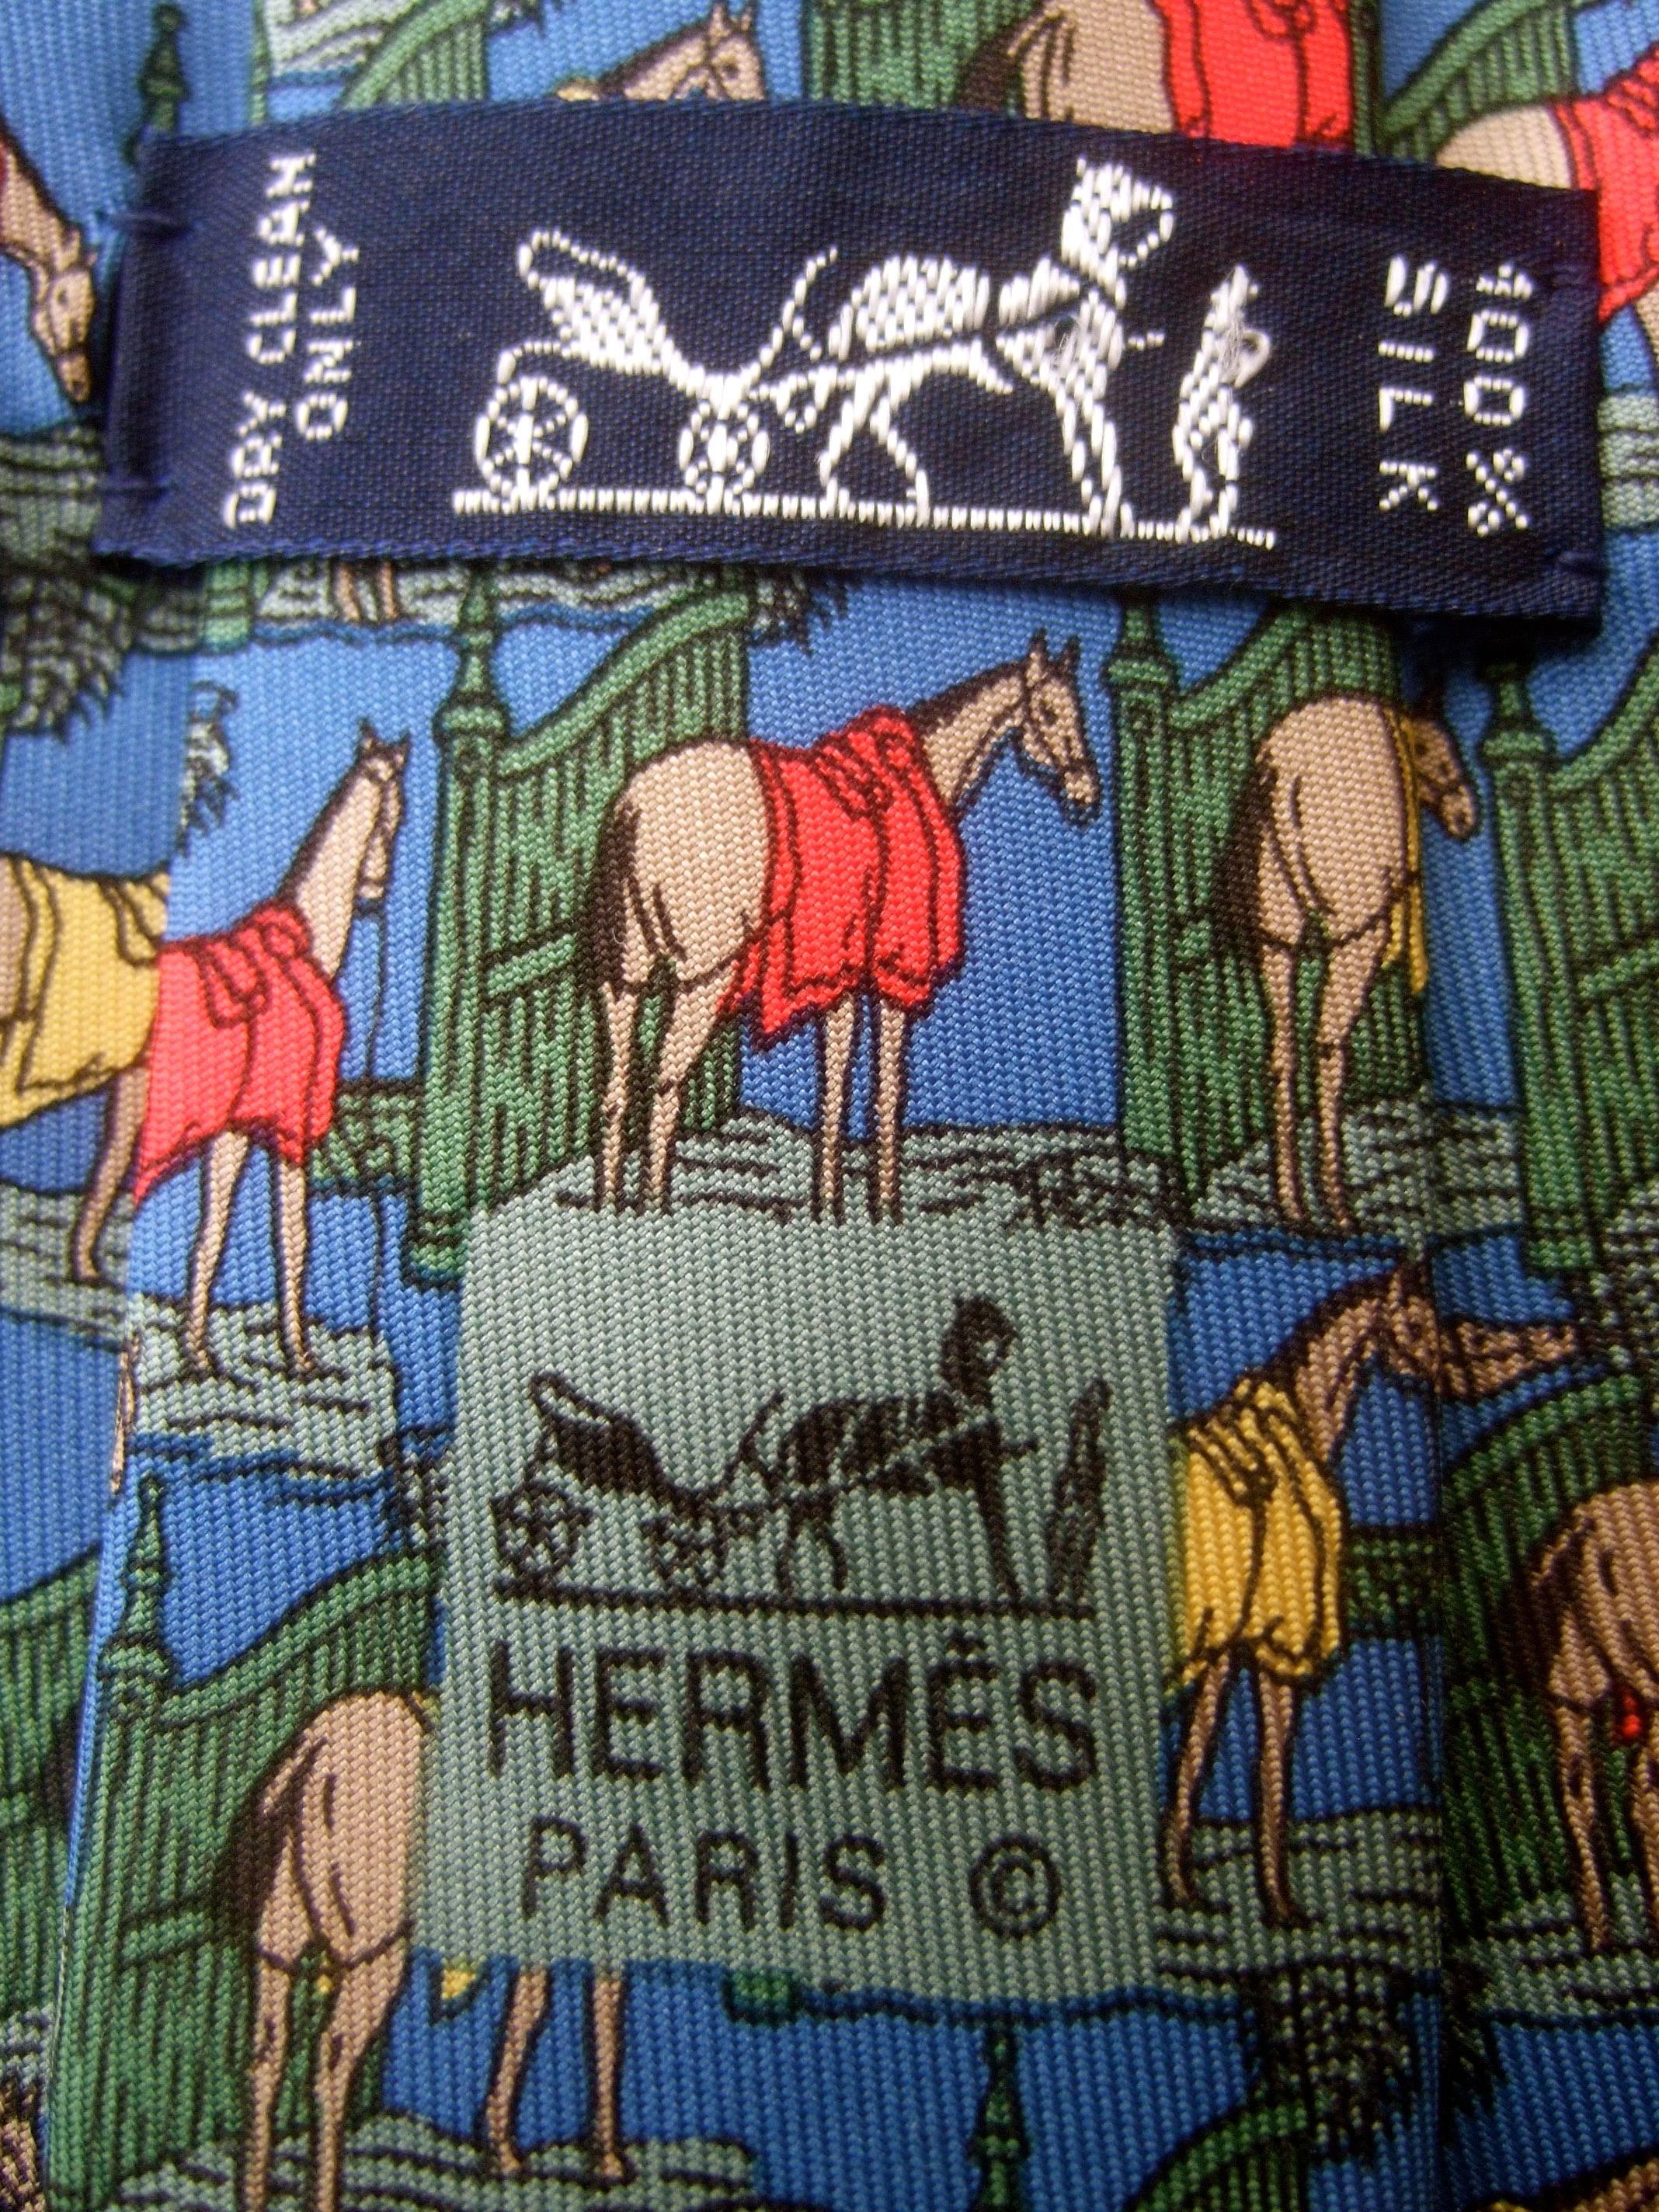 Hermes Paris Silk equine print necktie c 1990 
The stylish designer silk necktie is illustrated 
with a series of majestic horses 

The horses are illuminated against a vibrant blue
background. Makes an elegant accessory for 
the equestrian